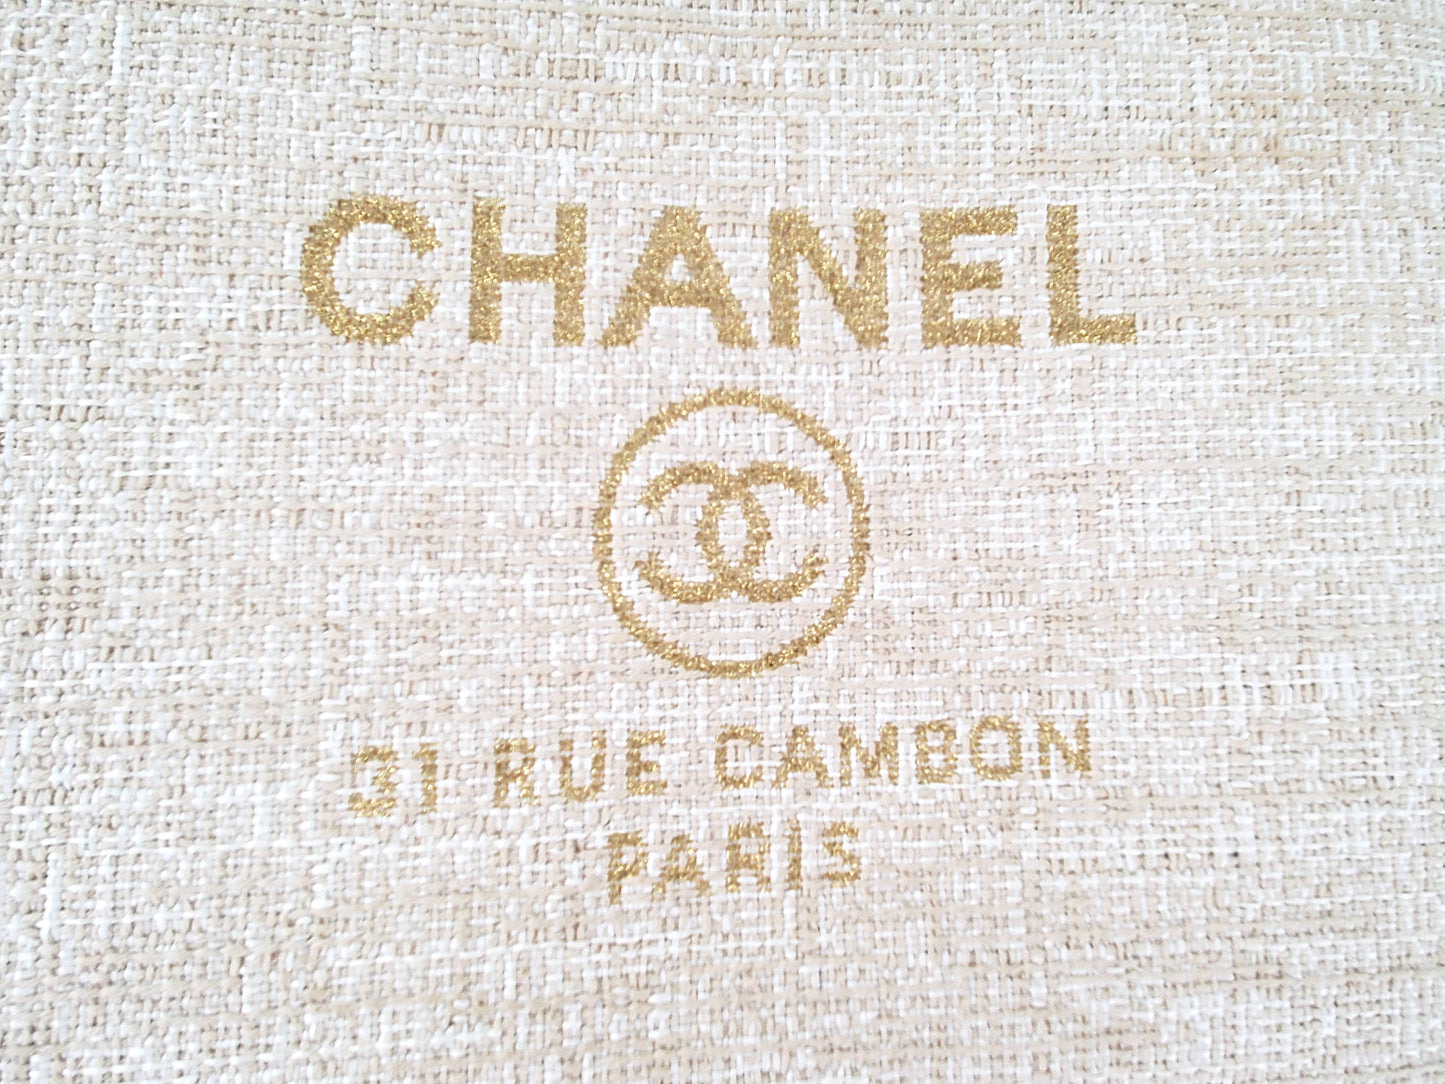 Chanel Large Deauville O-Case Woven Clutch Laptop Holder